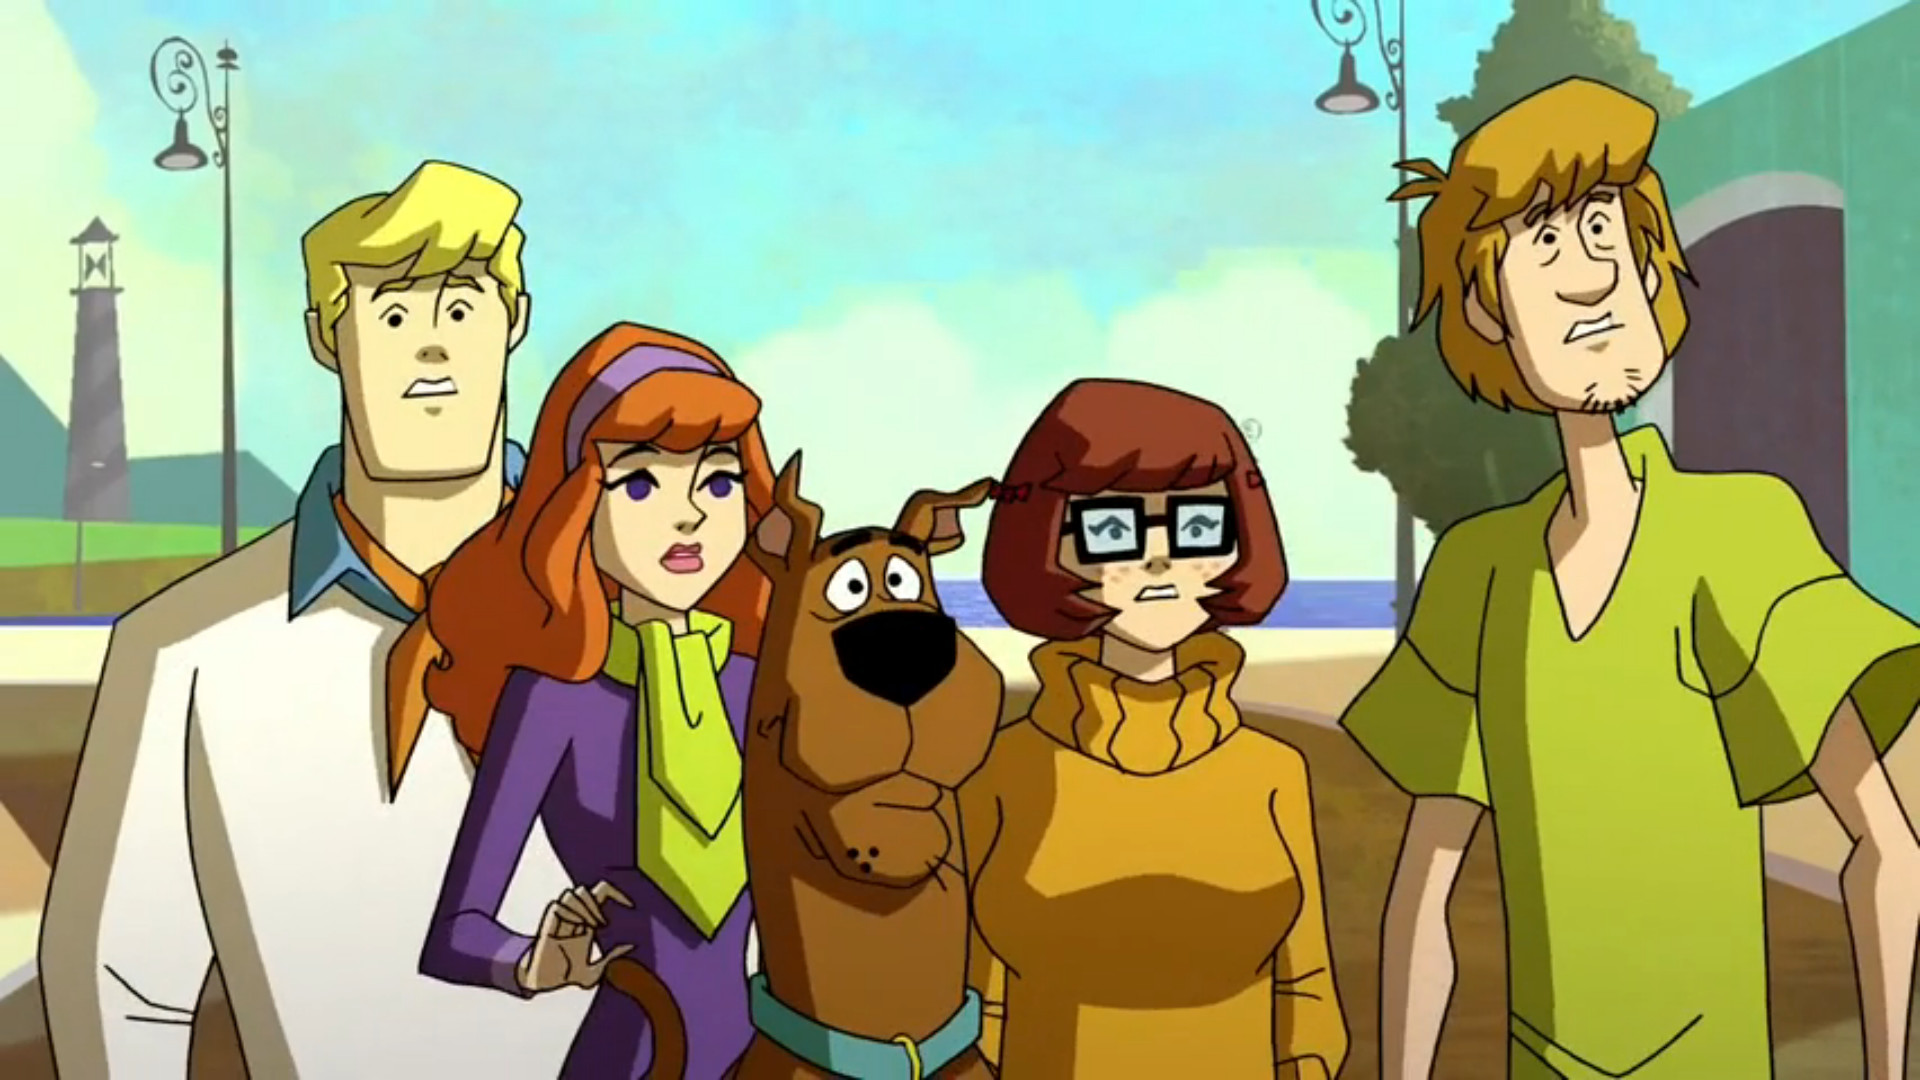 1920x1080 wallpaper.wiki-Scooby-Doo-Pictures-PIC-WPD007692